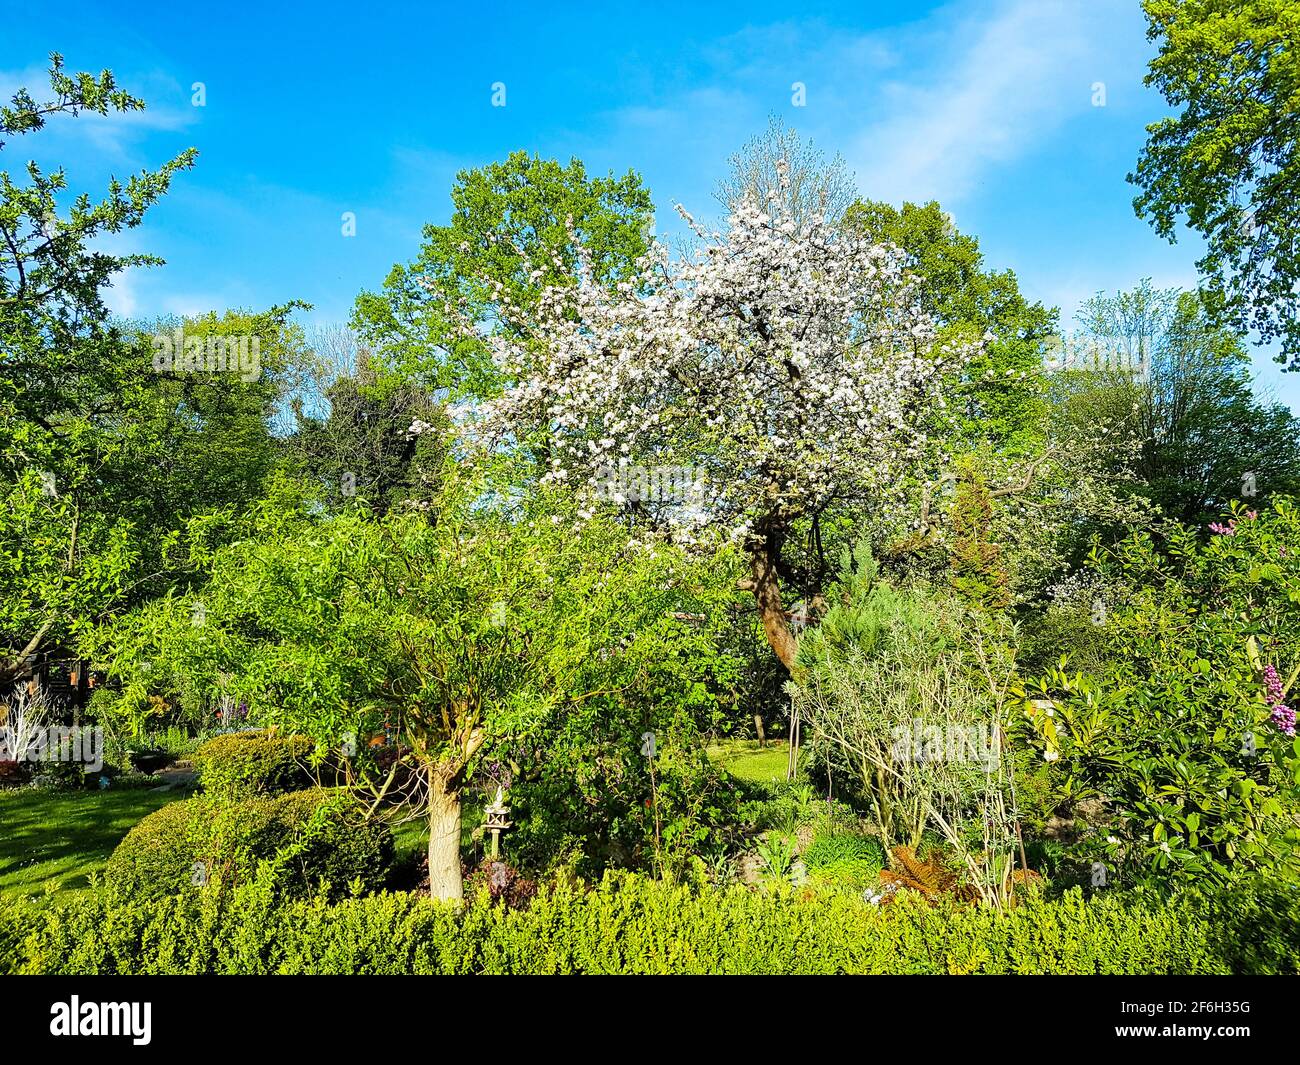 Fruit trees deciduous trees partly in bloom with blossoms in green against sky blue clouds cottage garden park garden permaculture nature landscape Stock Photo